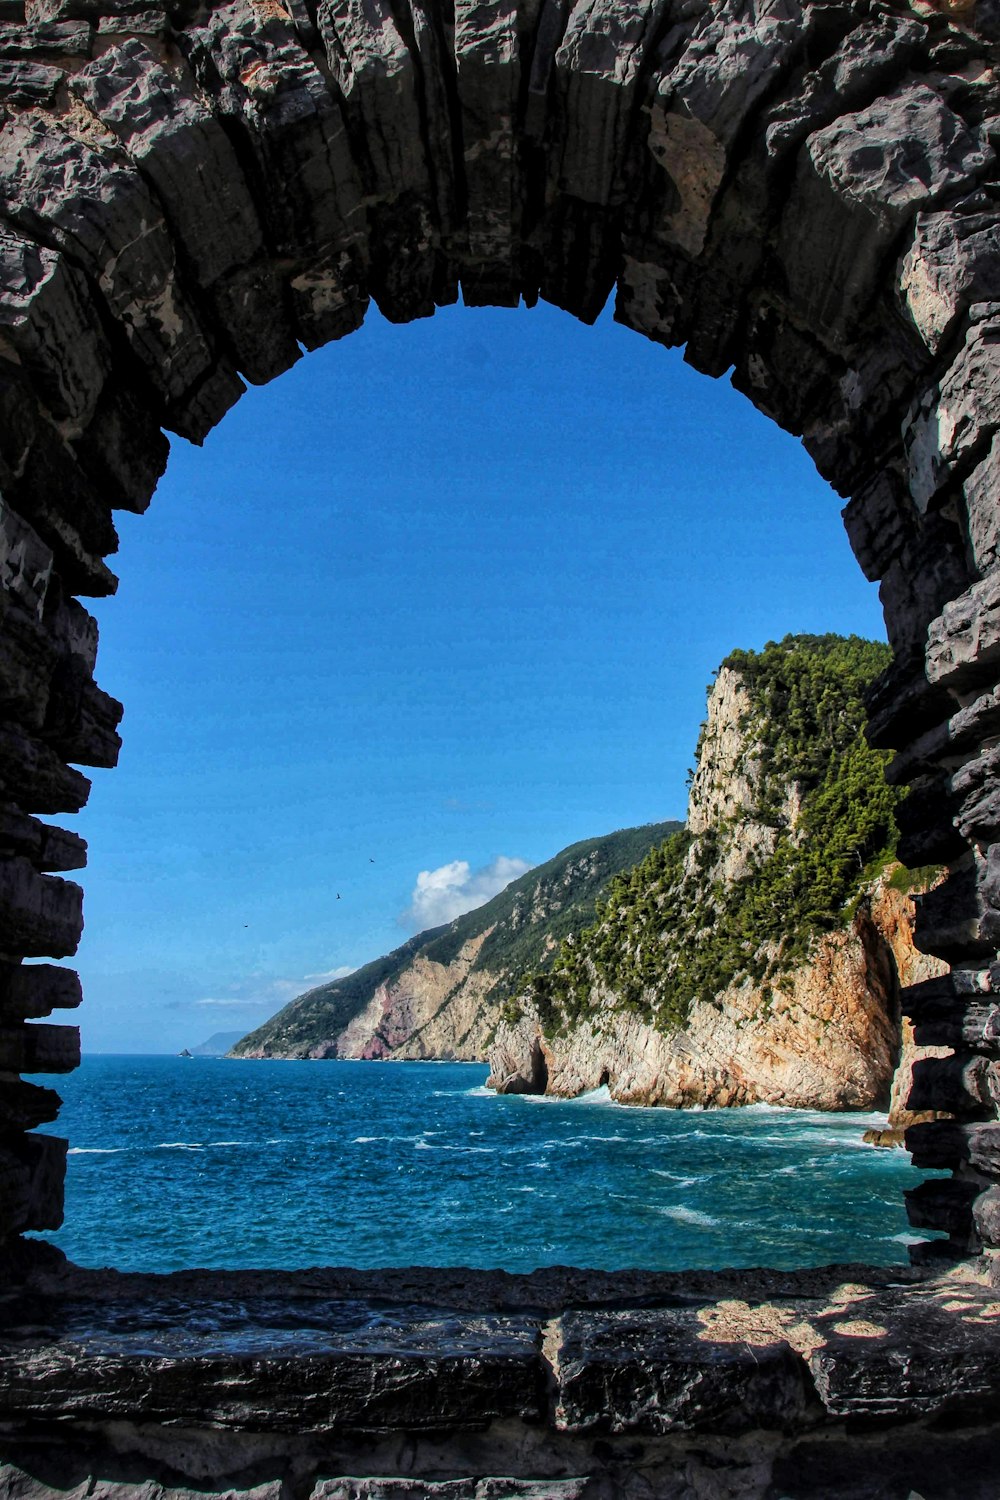 a view of a body of water through a stone arch